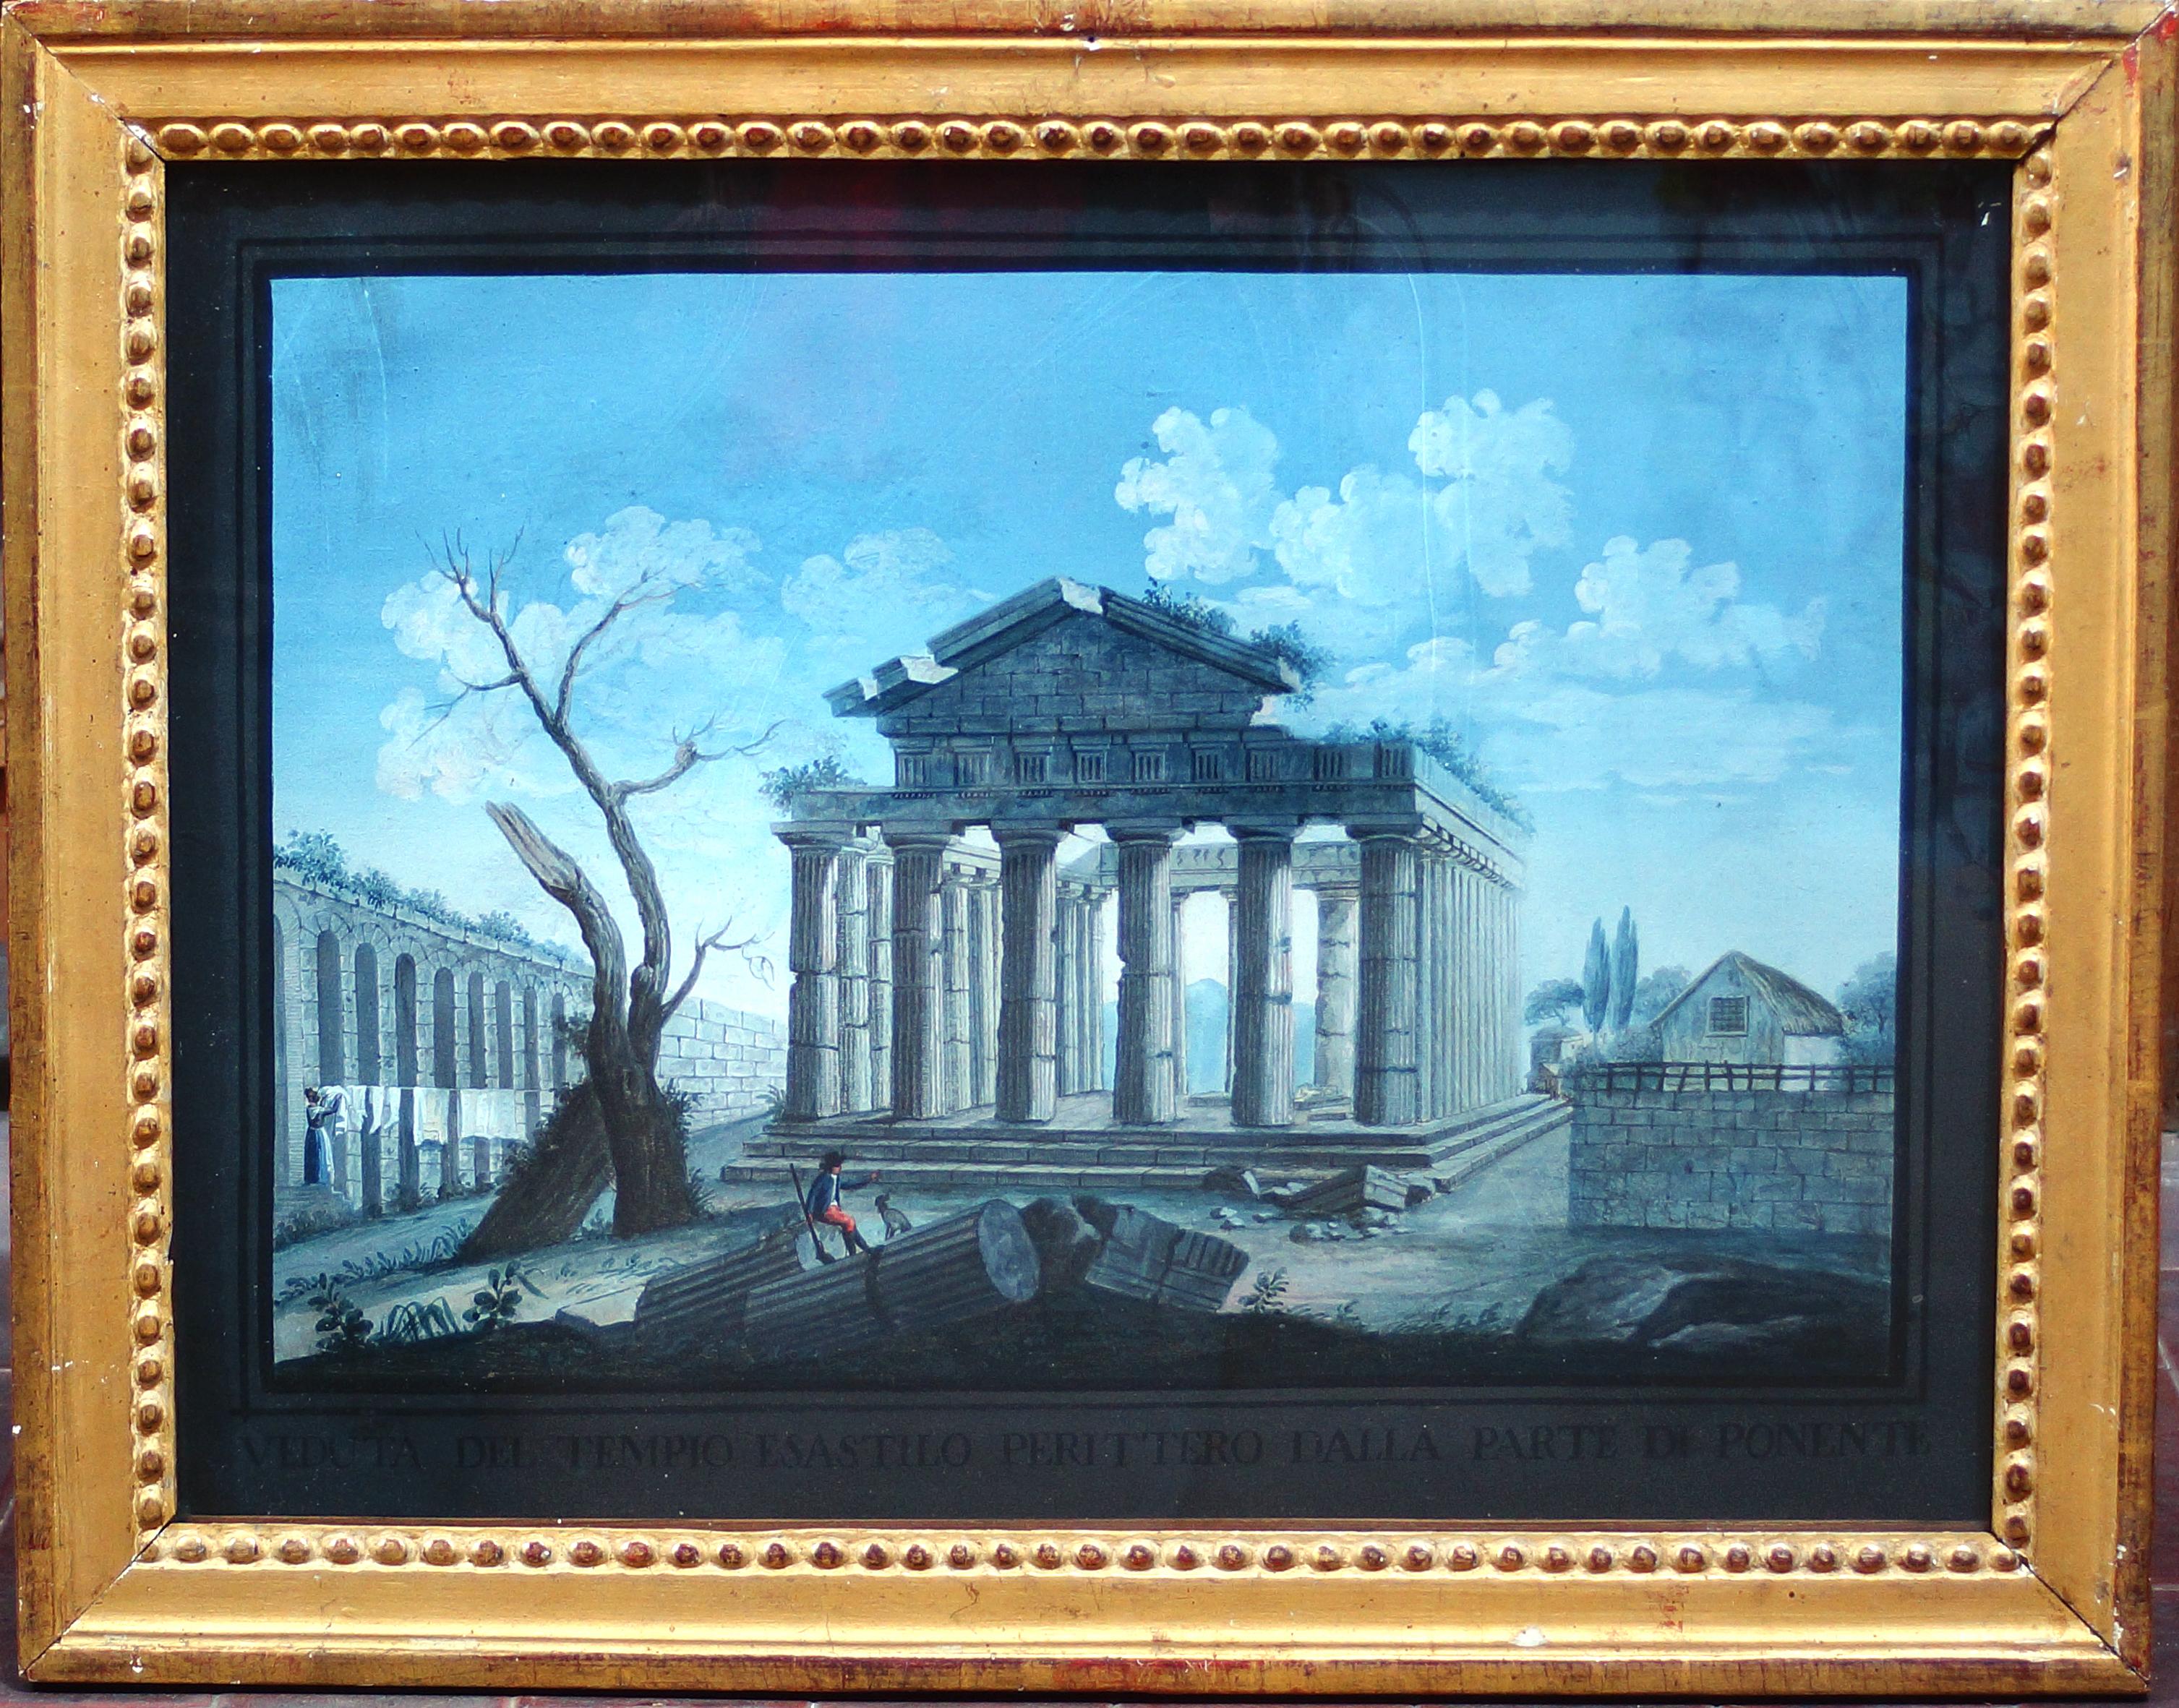 View of the Hexastyle Periptero Temple from the part of Ponente - Tempera  - Painting by Unknown